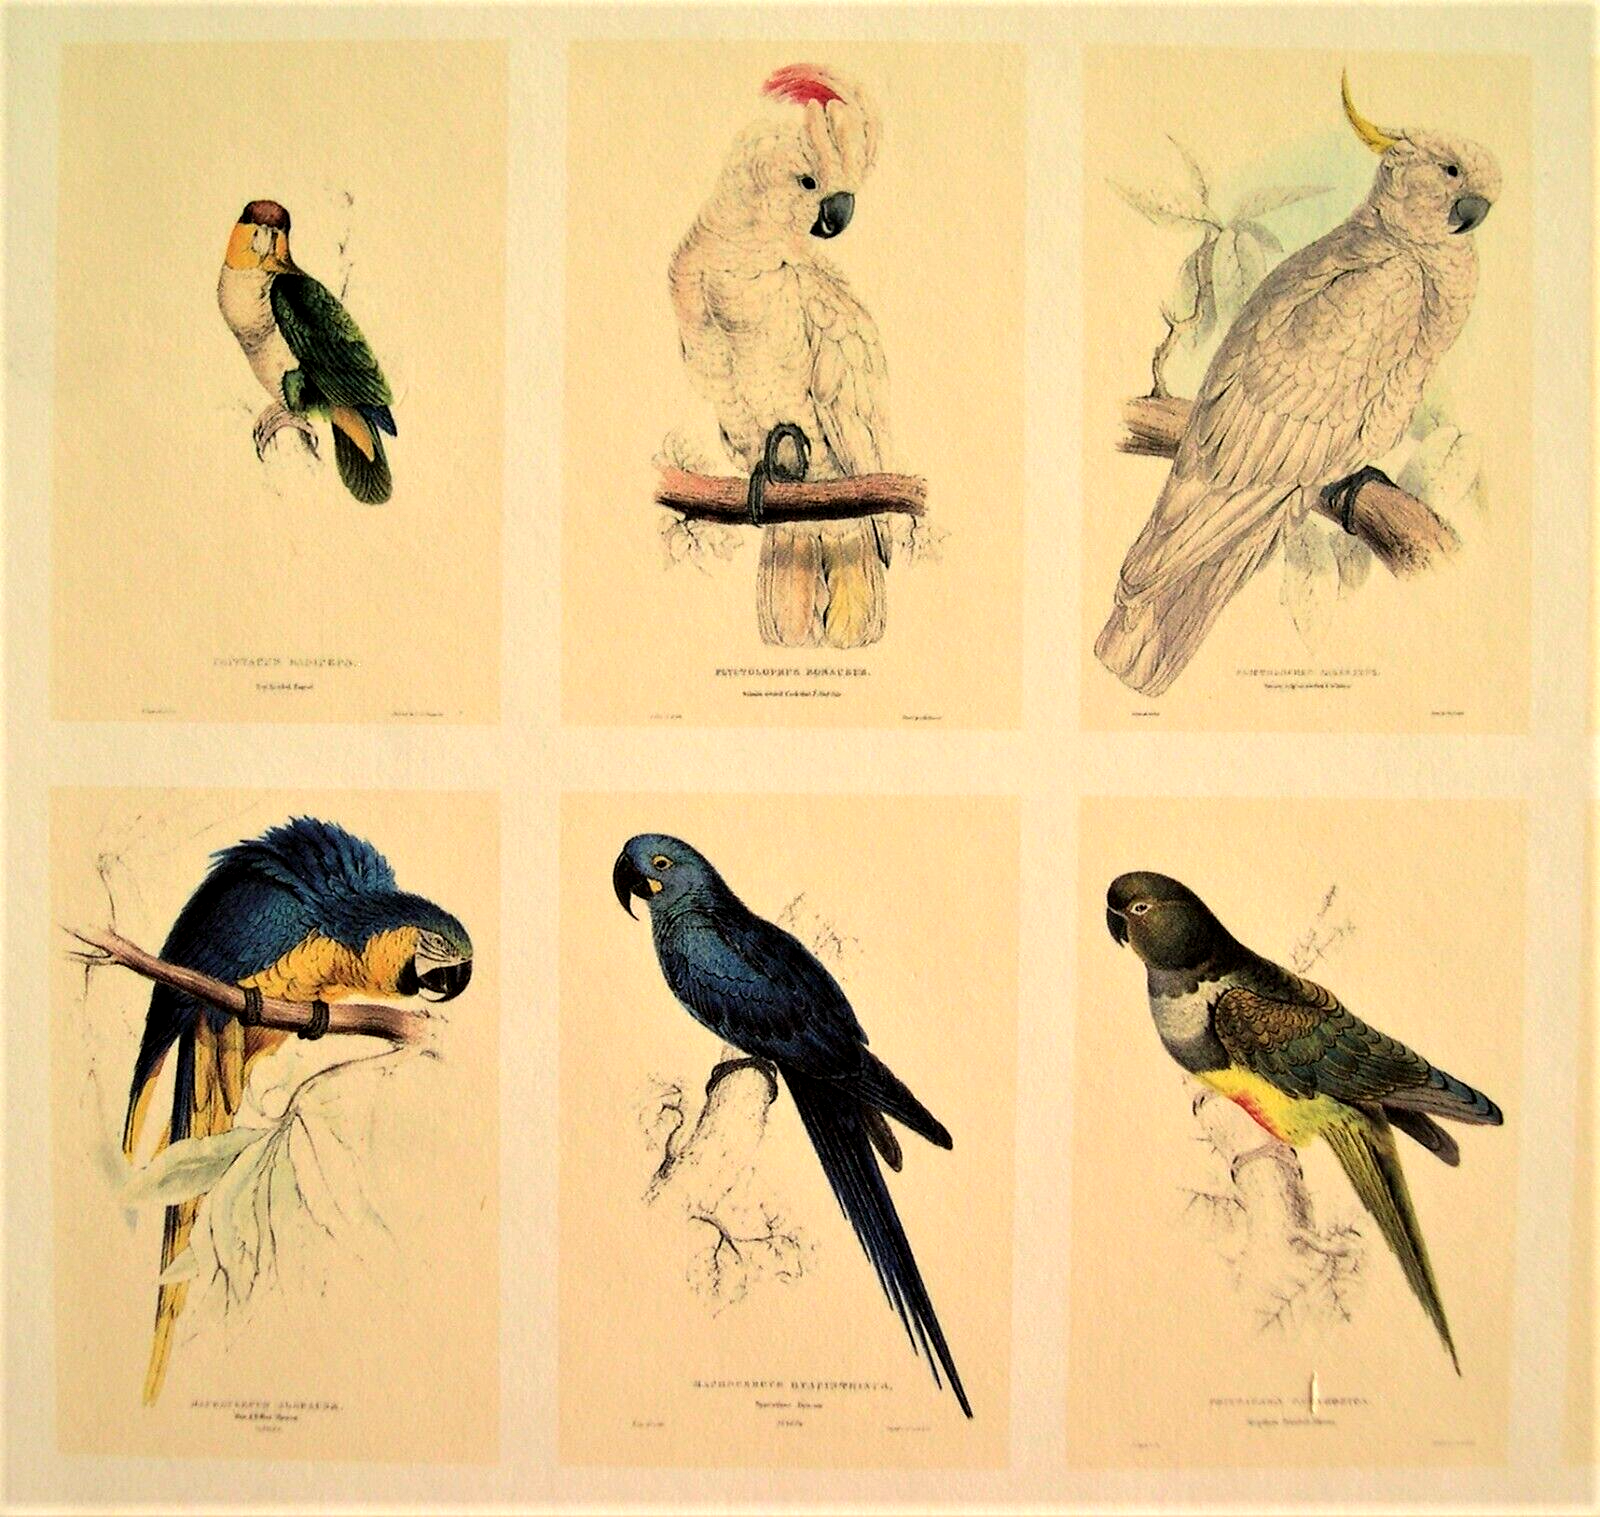 42 Lear Parrot Prints; The Complete Set Directly From His Original 1832 Folio Без бренда - фотография #7